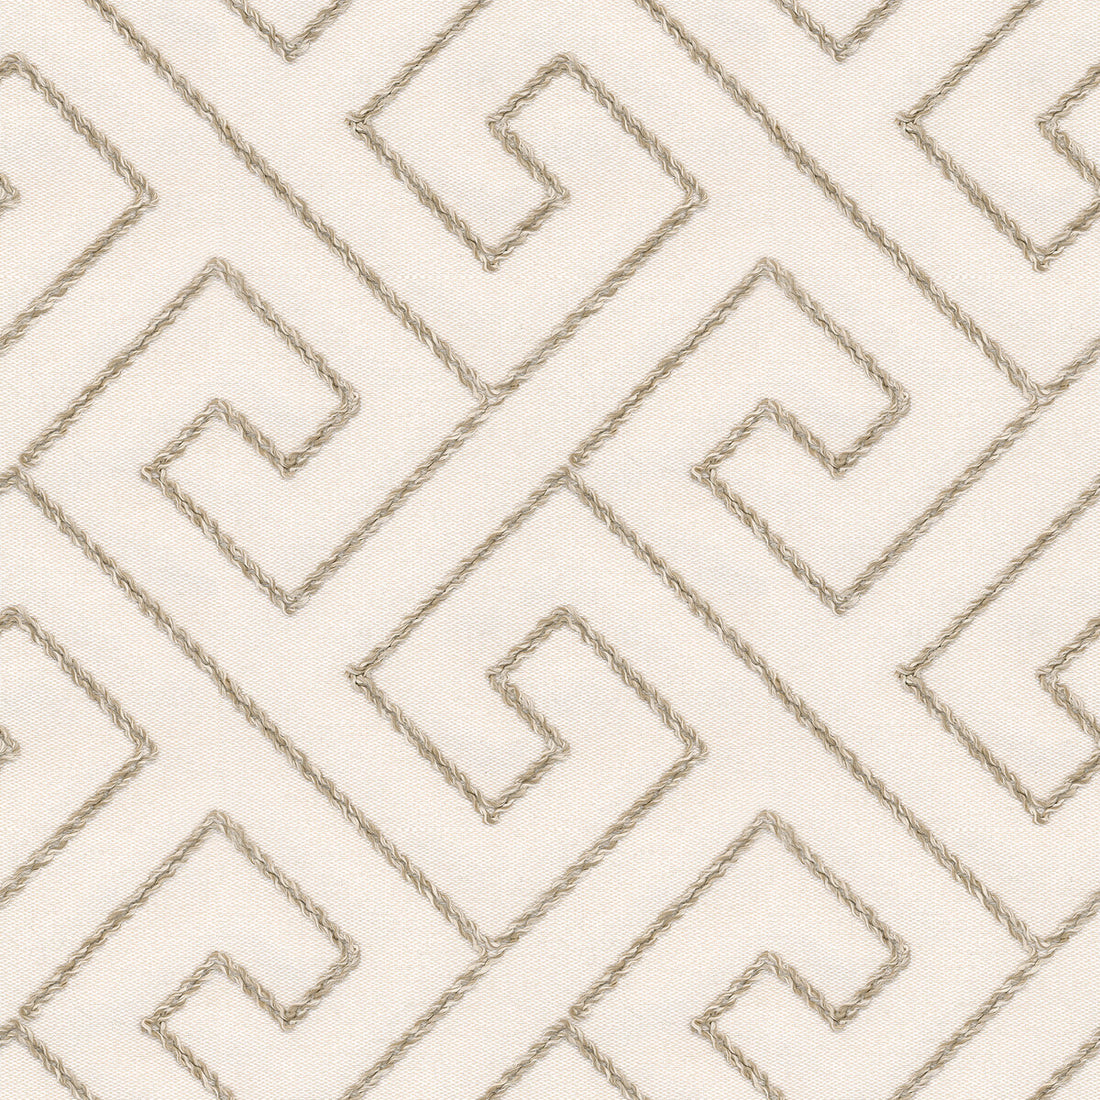 Pilgrimme fabric in beach color - pattern 34505.16.0 - by Kravet Design in the Echo Indoor Outdoor Ibiza collection